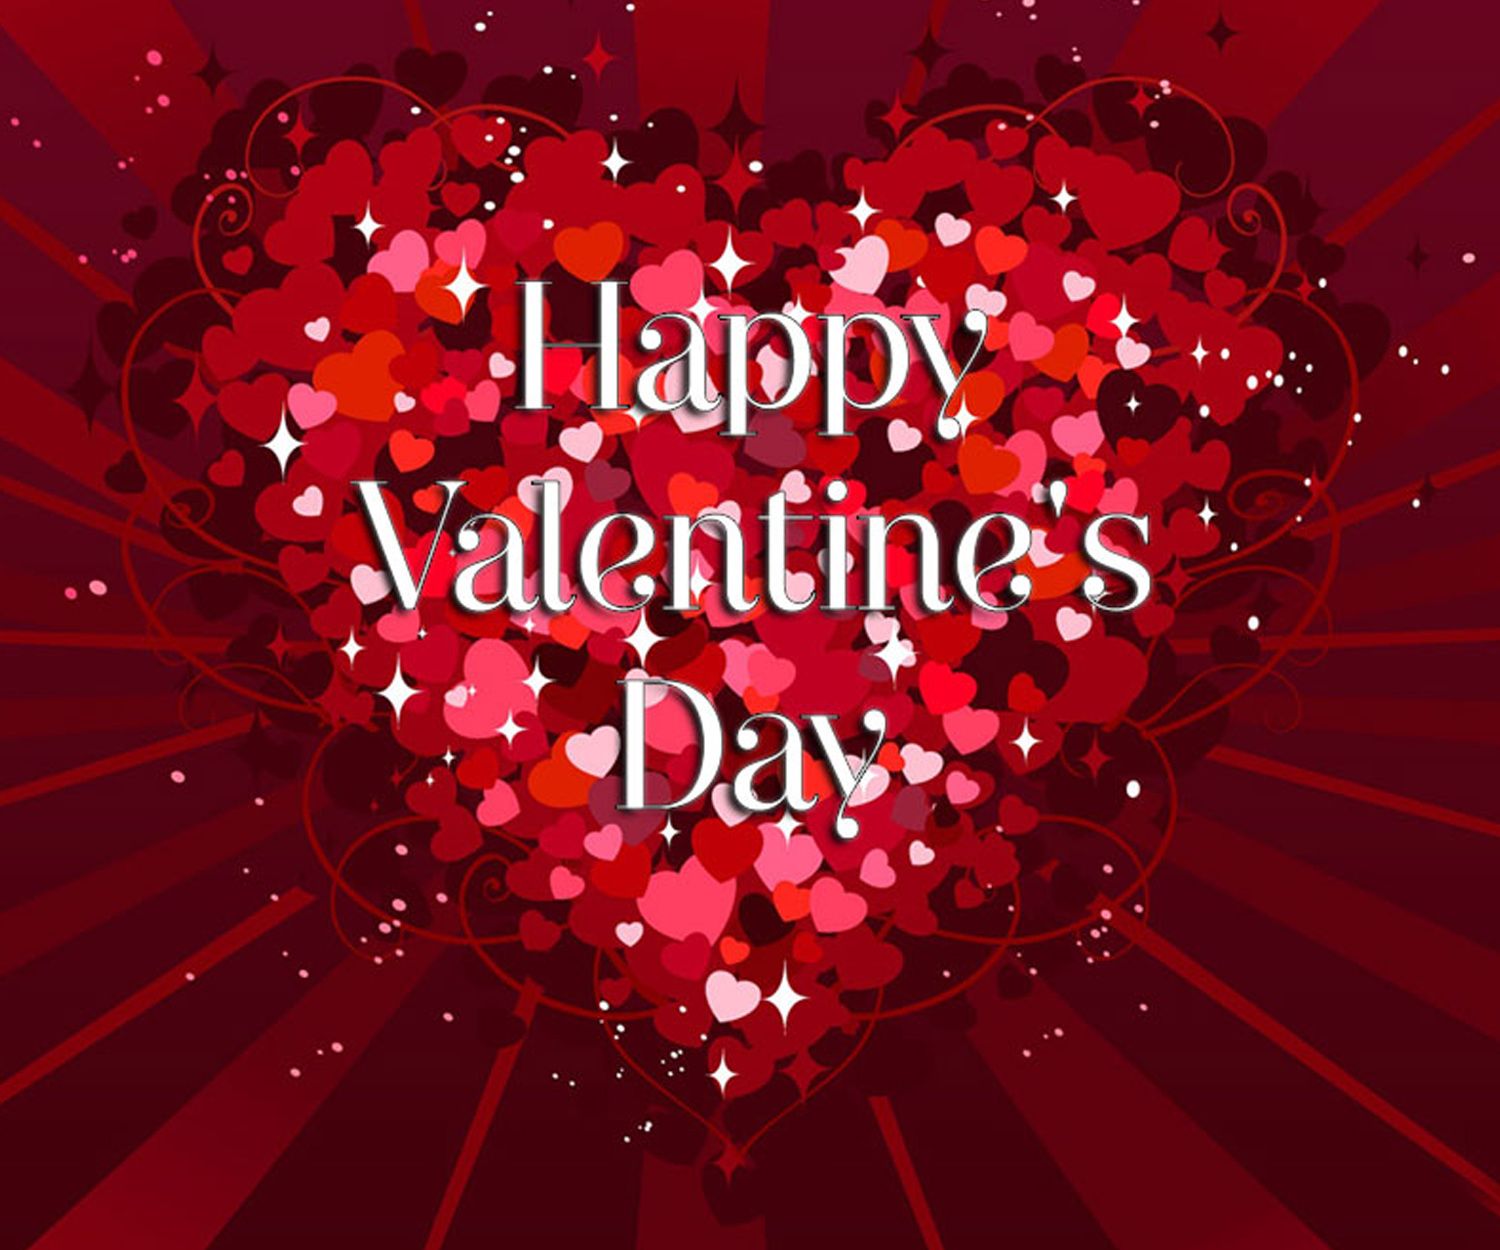 Top 5 HD Free Valentine's Day Wallpapers - The Quotes Land